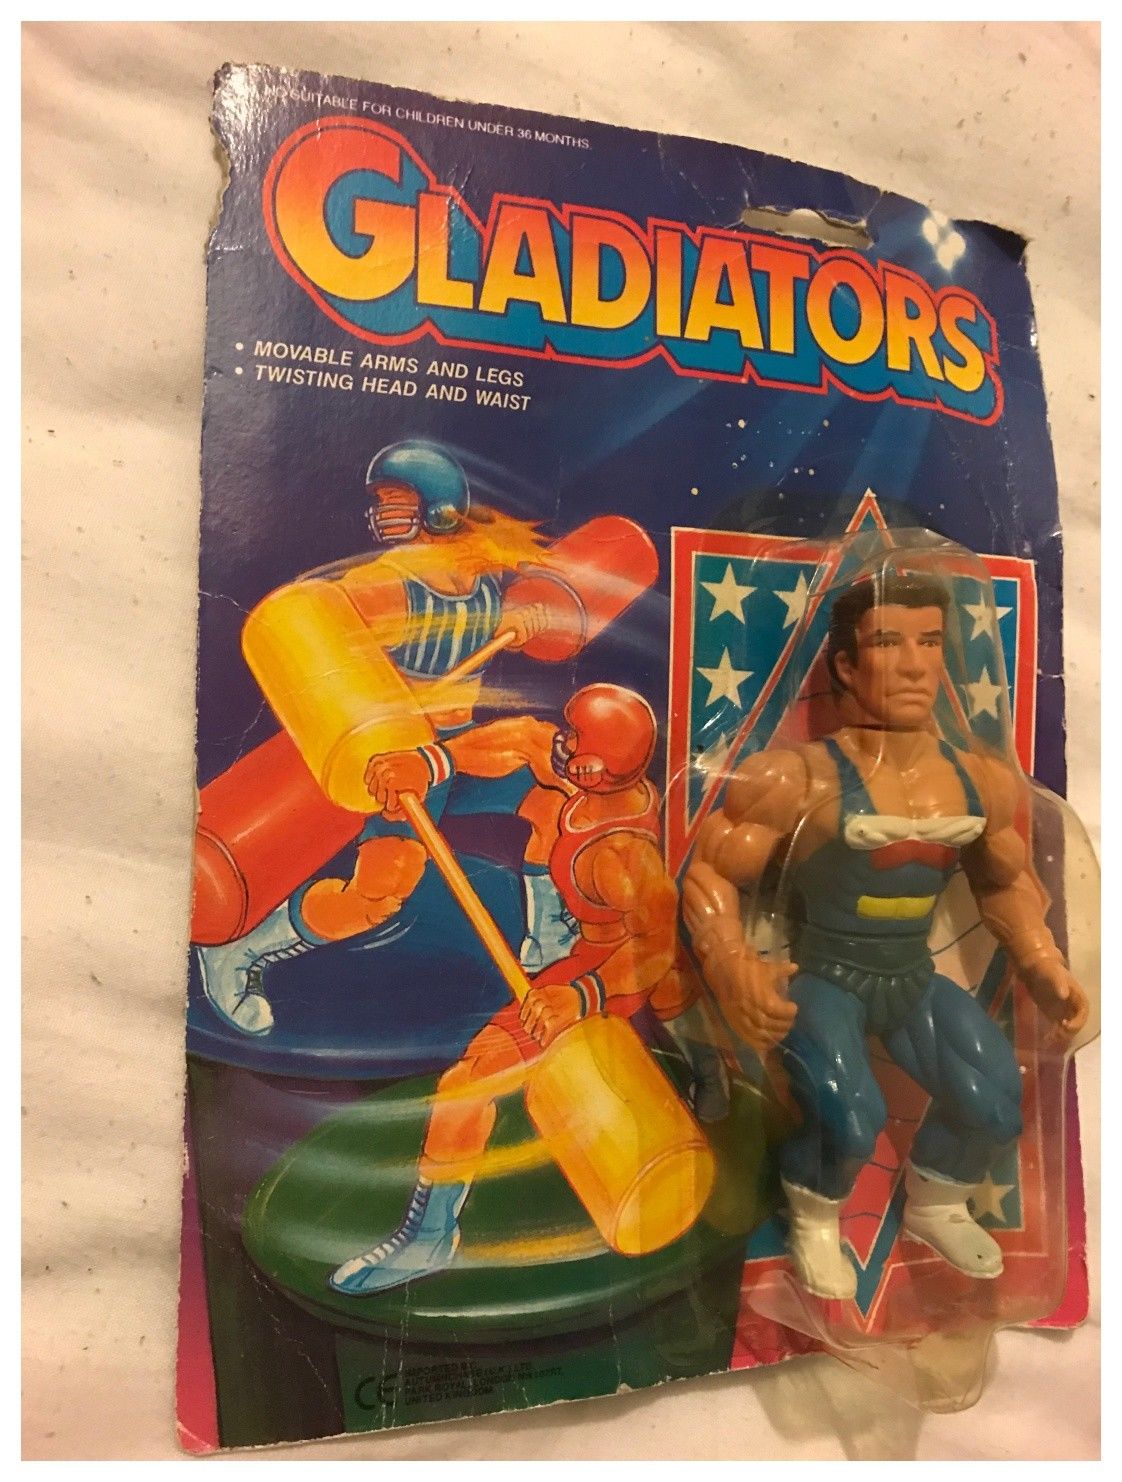 Gladiator Action Figure By Autumn Chase Ltd - Vintage 1980s - Sealed